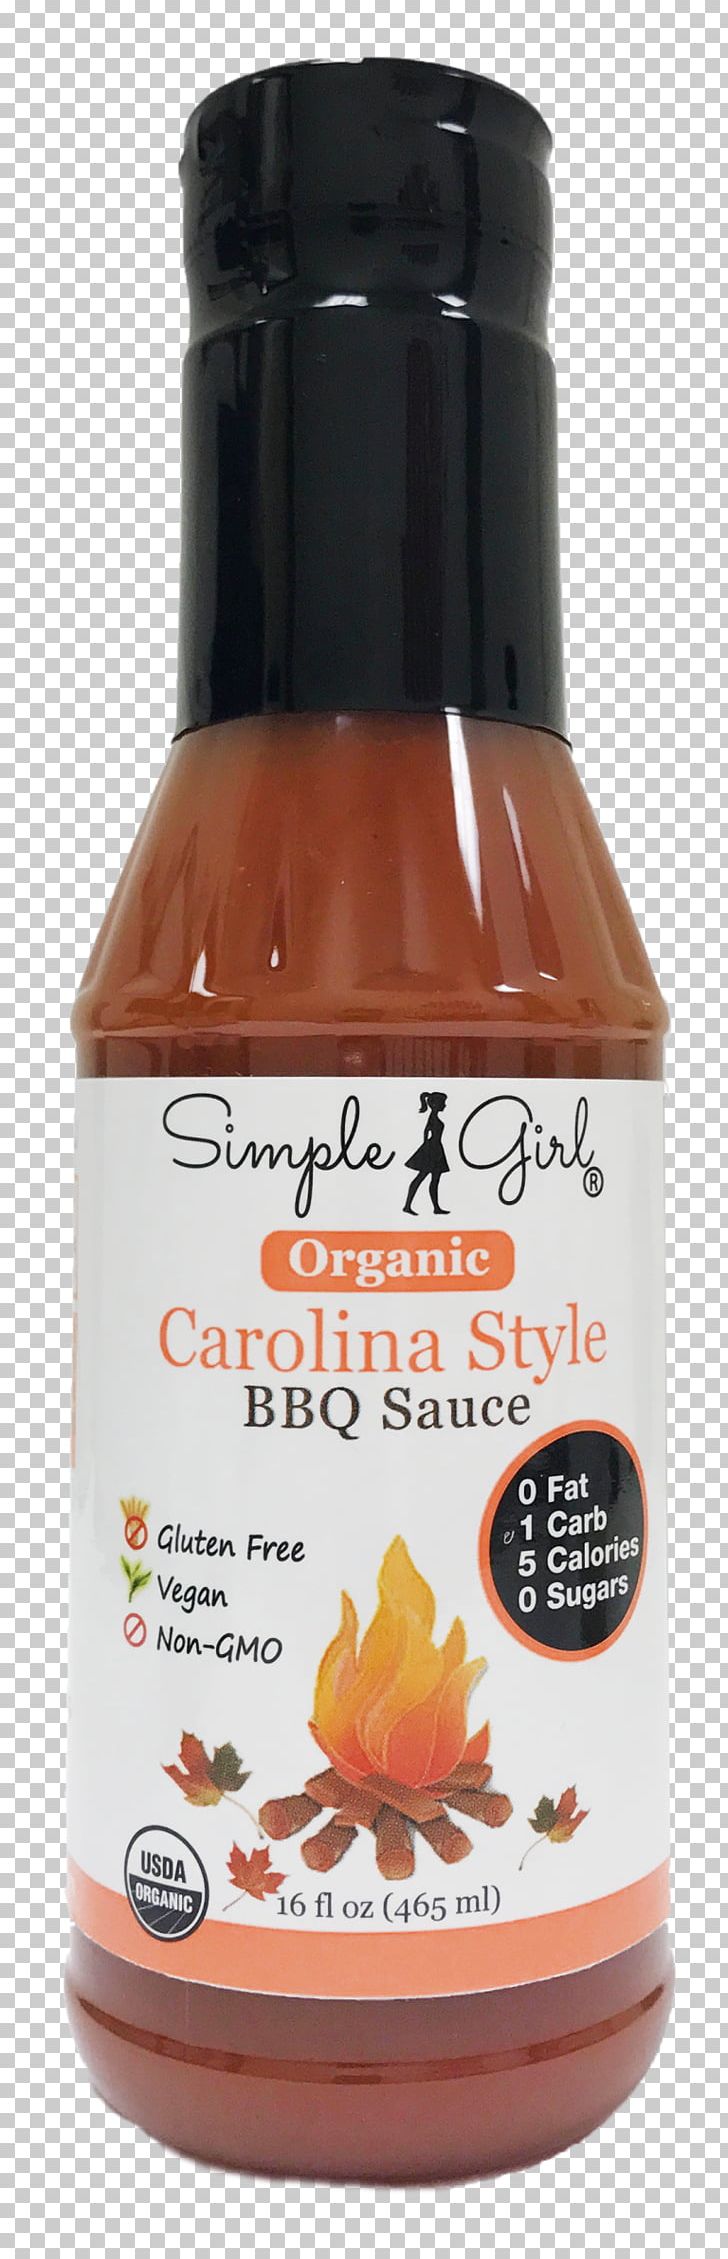 Sweet Chili Sauce Barbecue Sauce Gluten-free Diet Hot Sauce Low-carbohydrate Diet PNG, Clipart, Barbecue, Barbecue Sauce, Bbq, Bbq Sauce, Be Perfect Free PNG Download